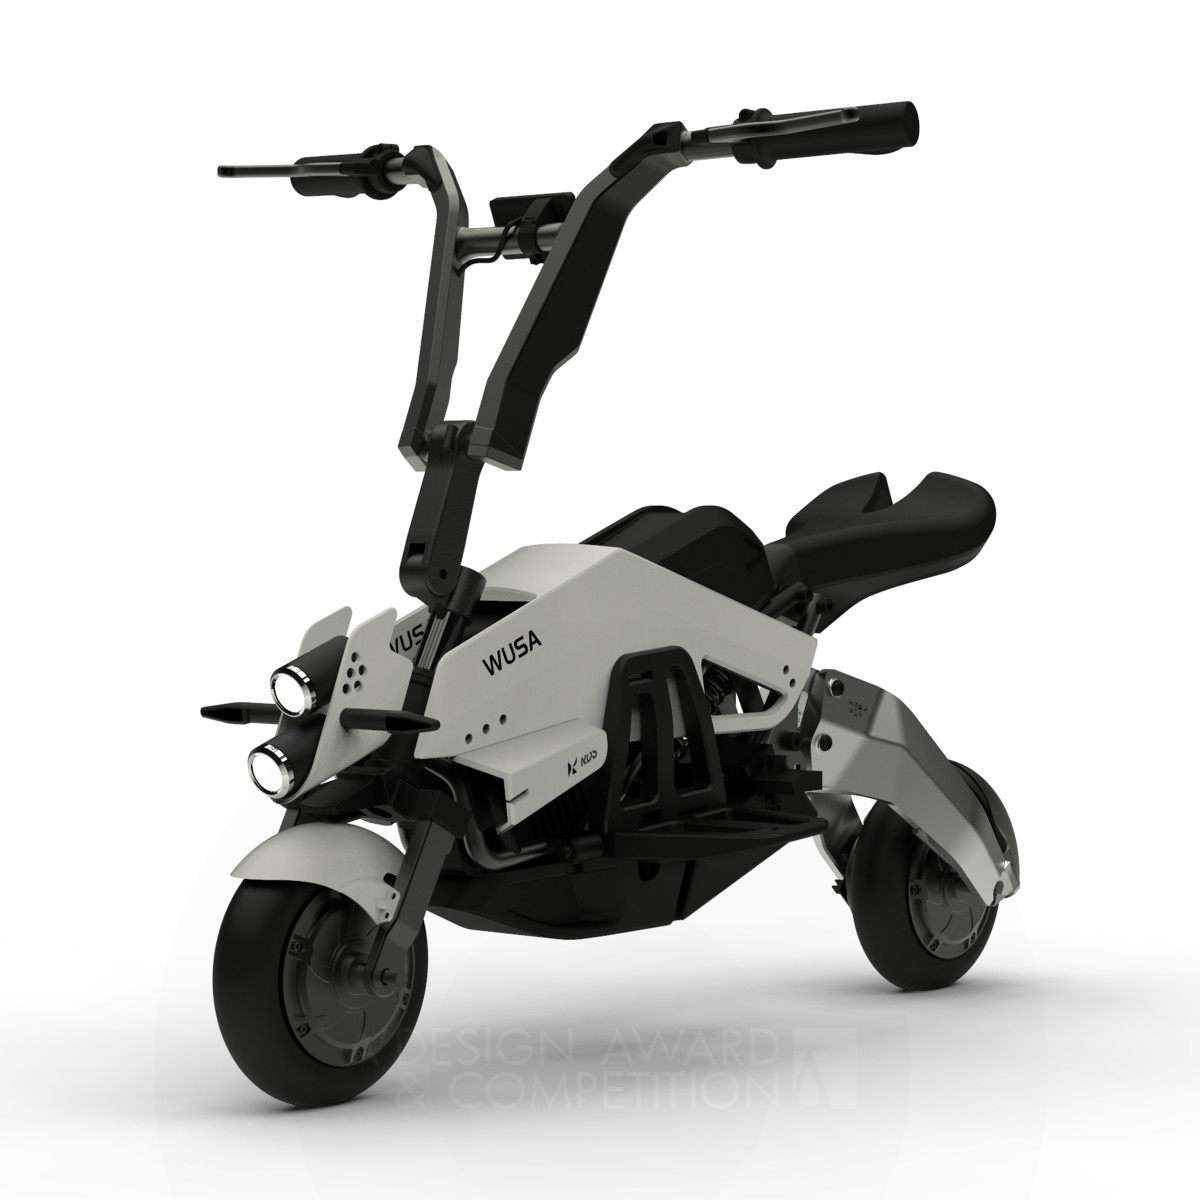 WUSA Electric Personal Mobility